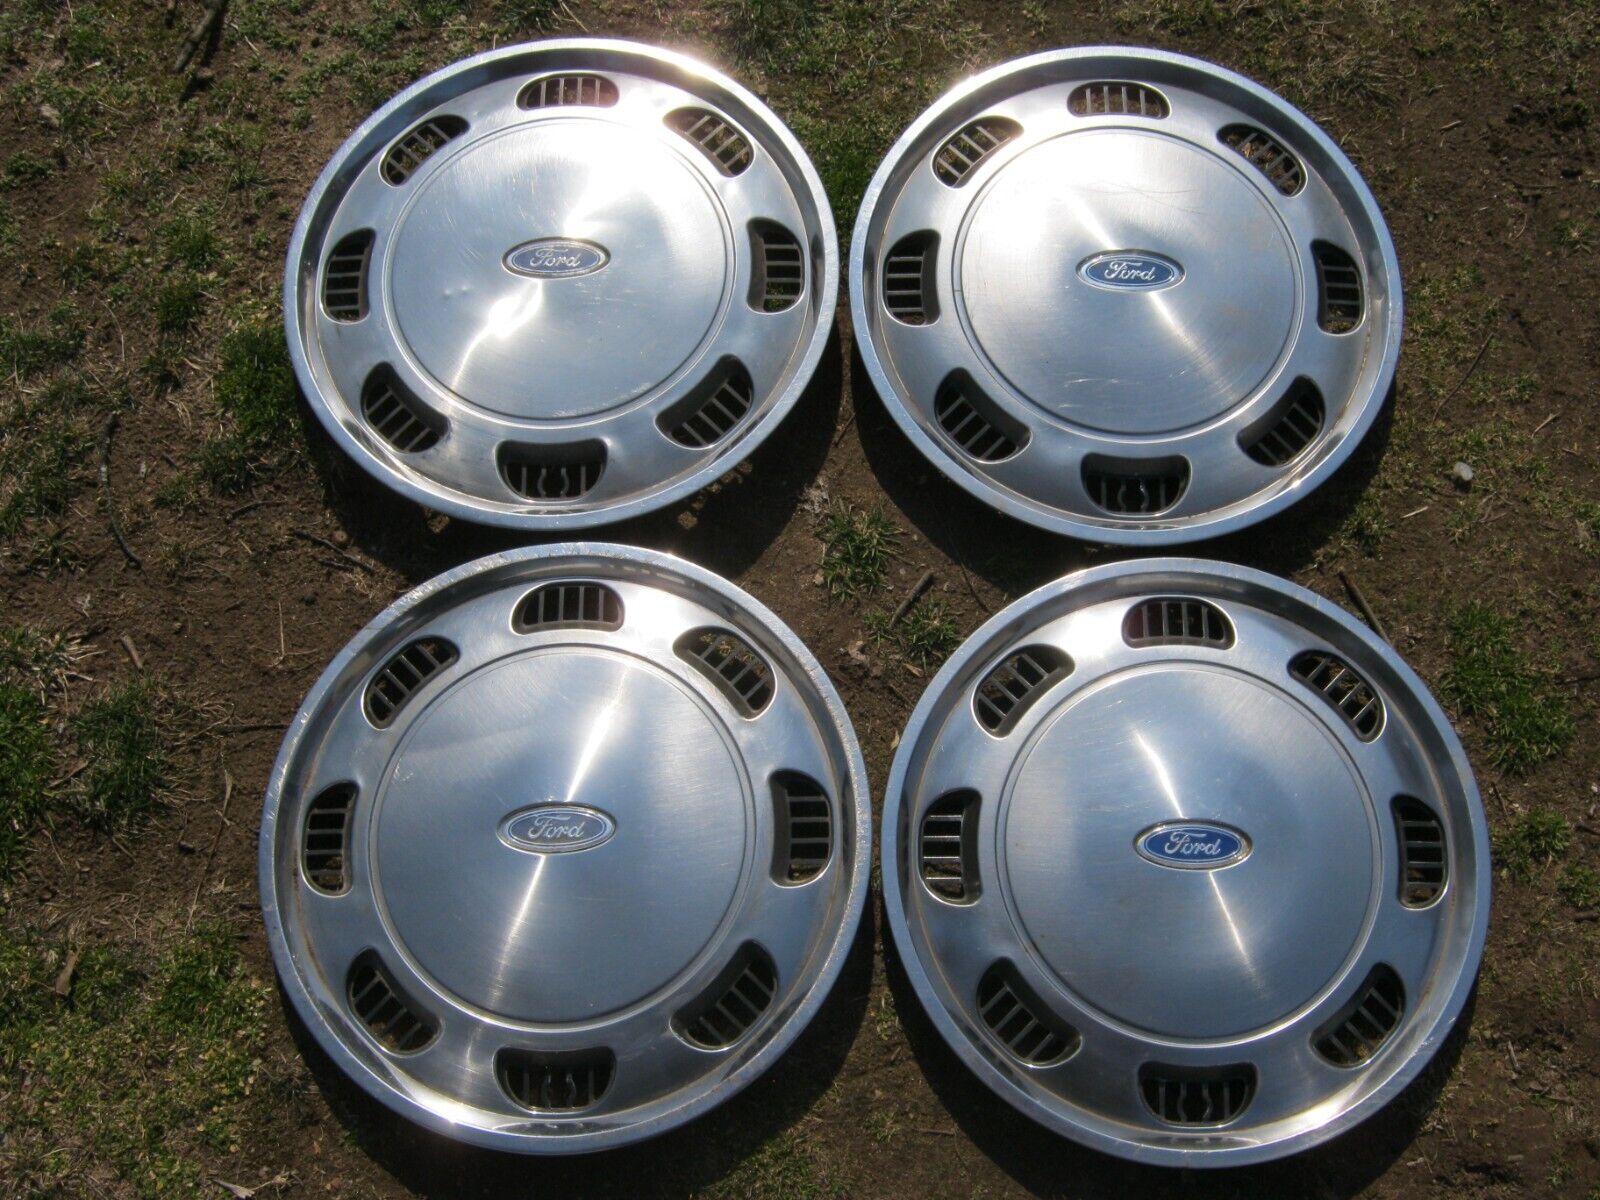 Factory original 1986 to 1990 Ford Tempo Aerostar 14 inch hubcaps wheel covers